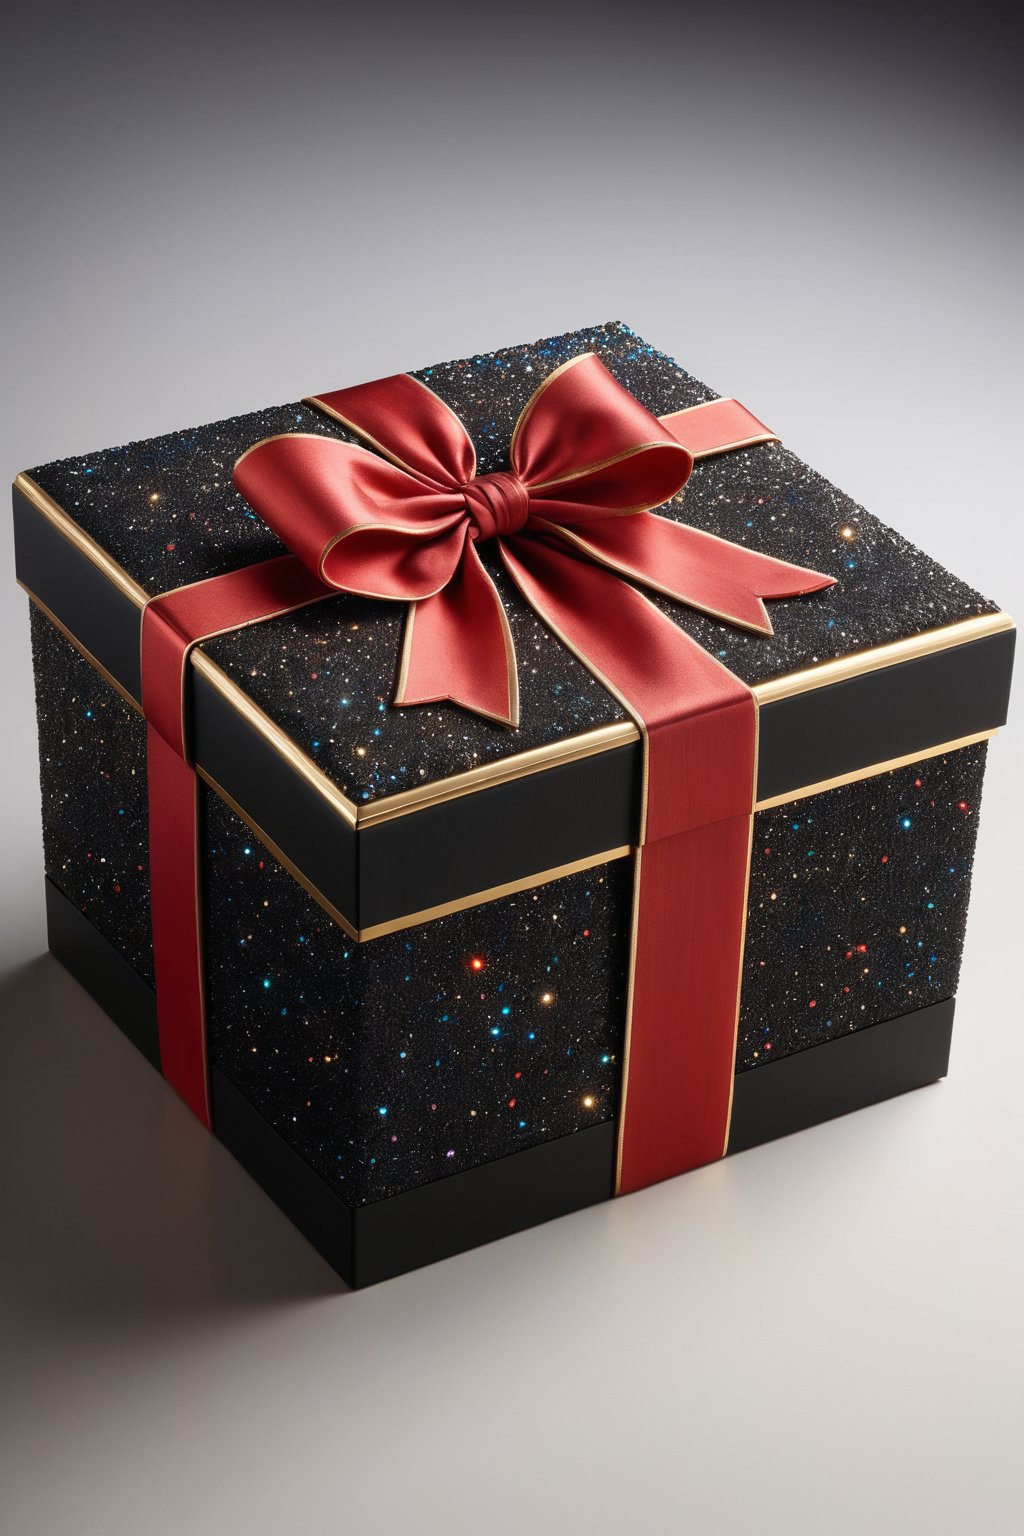 A majestic black gift box adorned with antique flair, a note in the front with the text ((("TA 1 year"))) . A striking red topknot adorns the lid, adding a pop of vibrant color to the overall design. The box itself is crafted with meticulous attention to detail, showcasing a hyper-realistic finish that invites tactile exploration. Against a dark background, the box's intricate details and rich textures leap forth in high-definition glory over a modern table, soft light from above,glitter